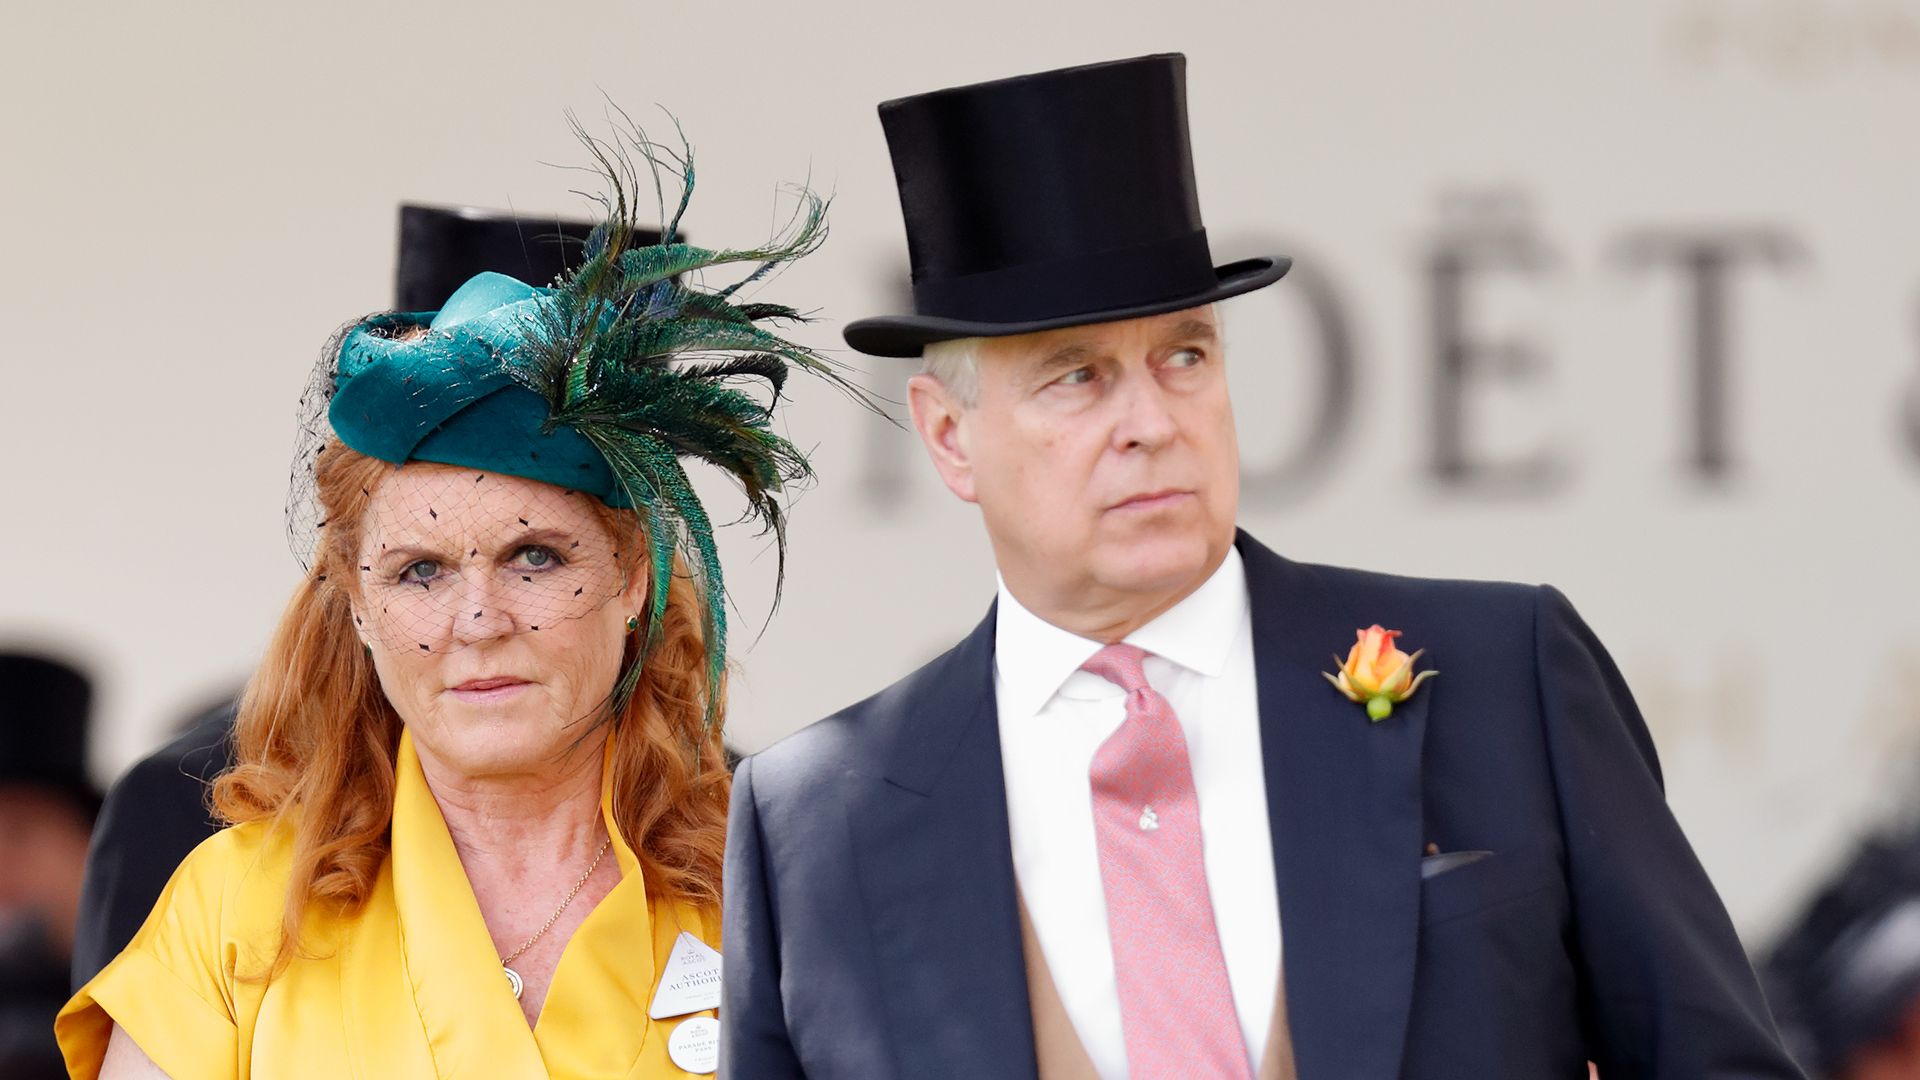 Sarah Ferguson, Duchess of York and Prince Andrew, Duke of York attend day four of Royal Ascot at Ascot Racecourse in 2019